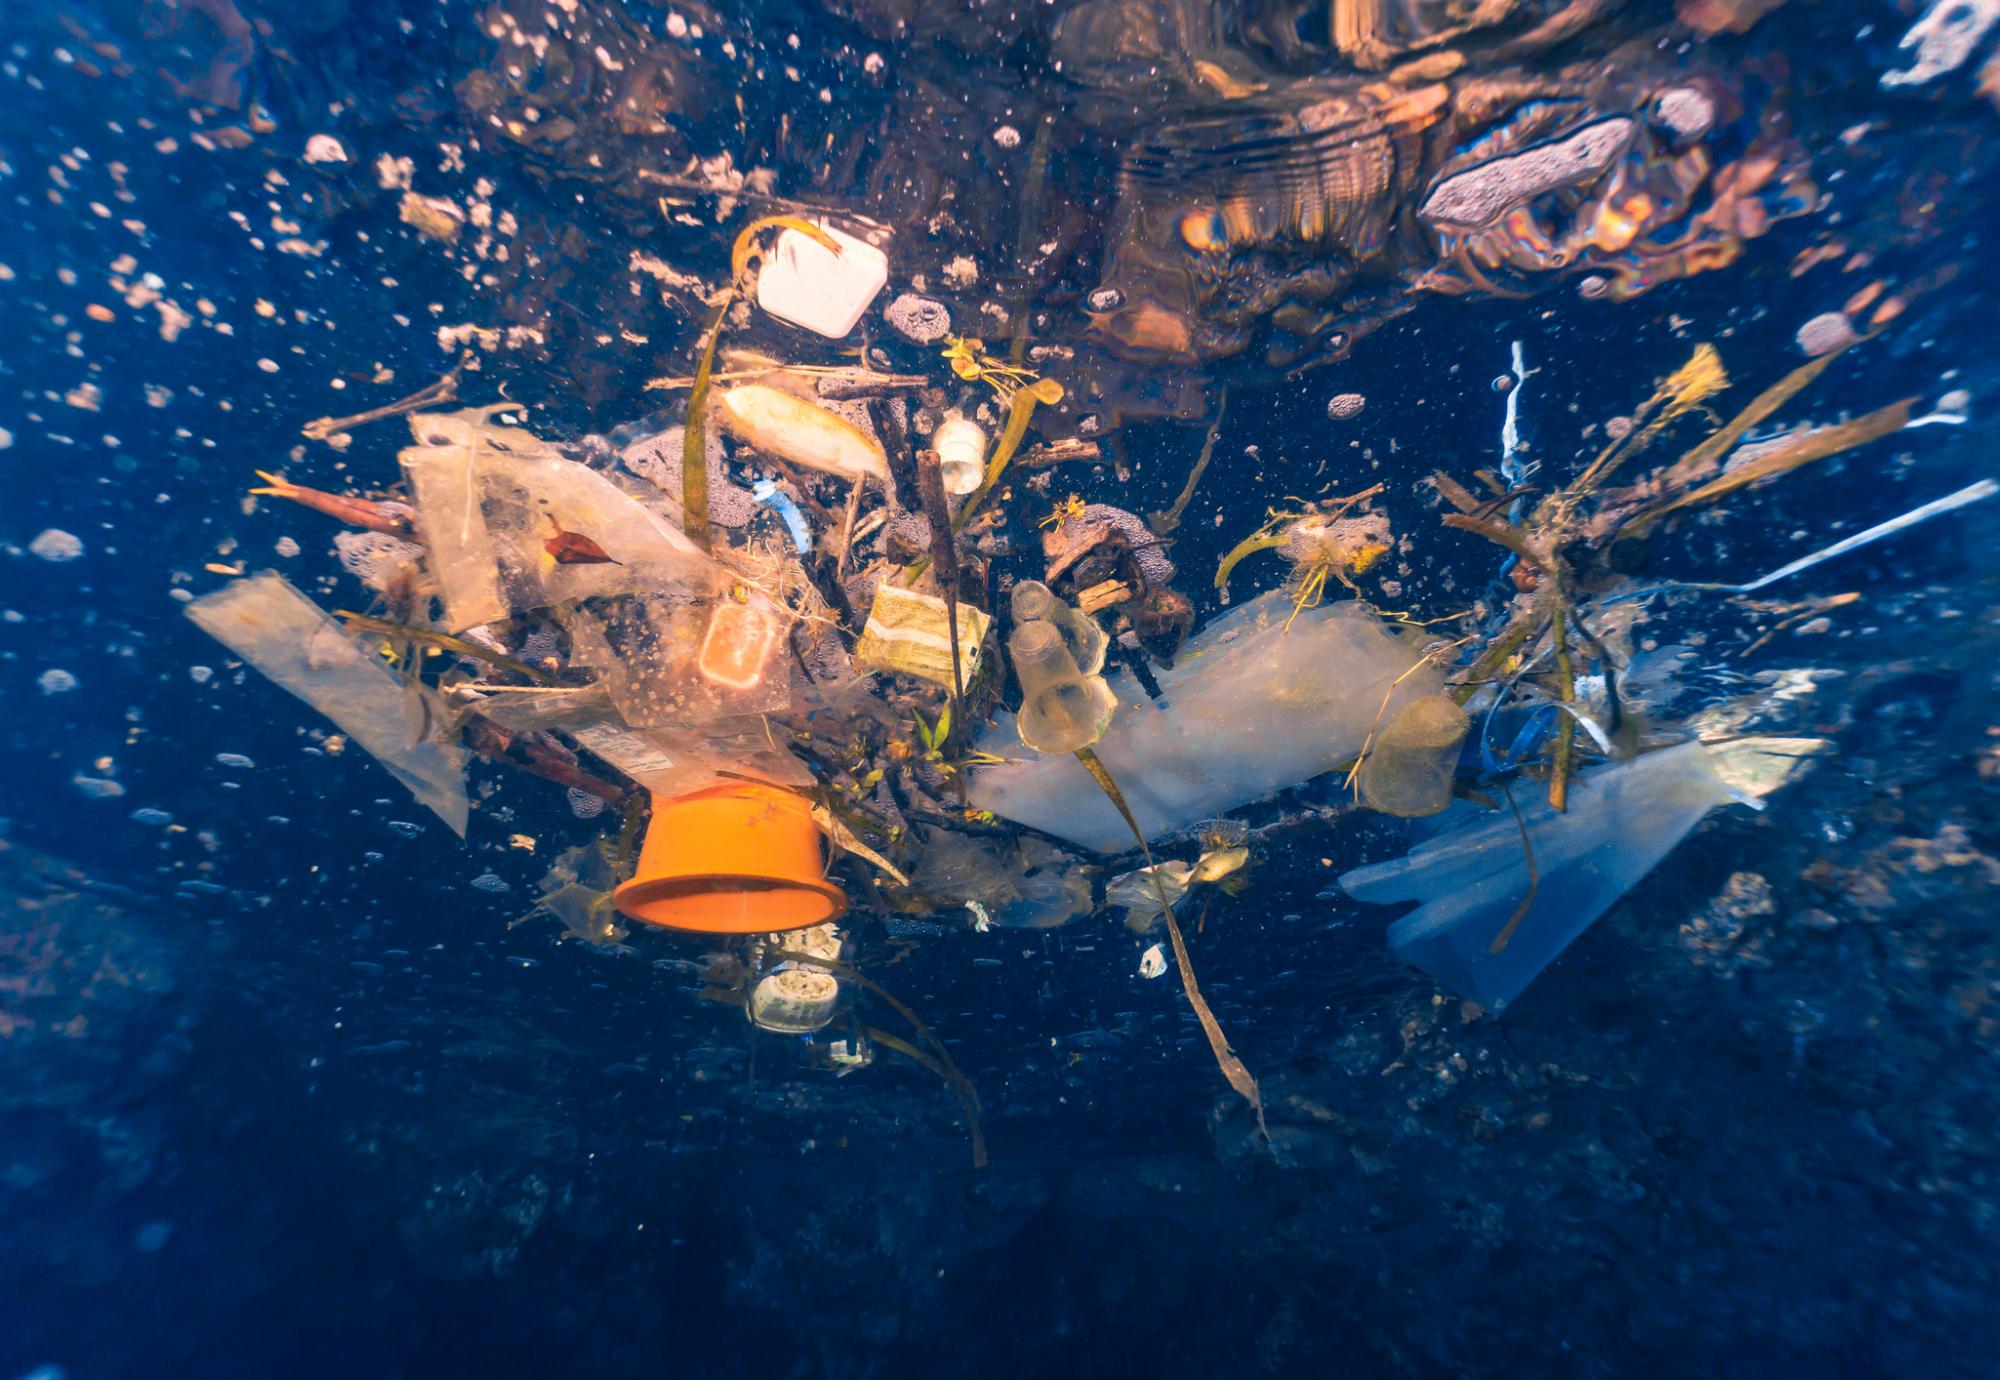 Discarded single use plastic drifts in the ocean.